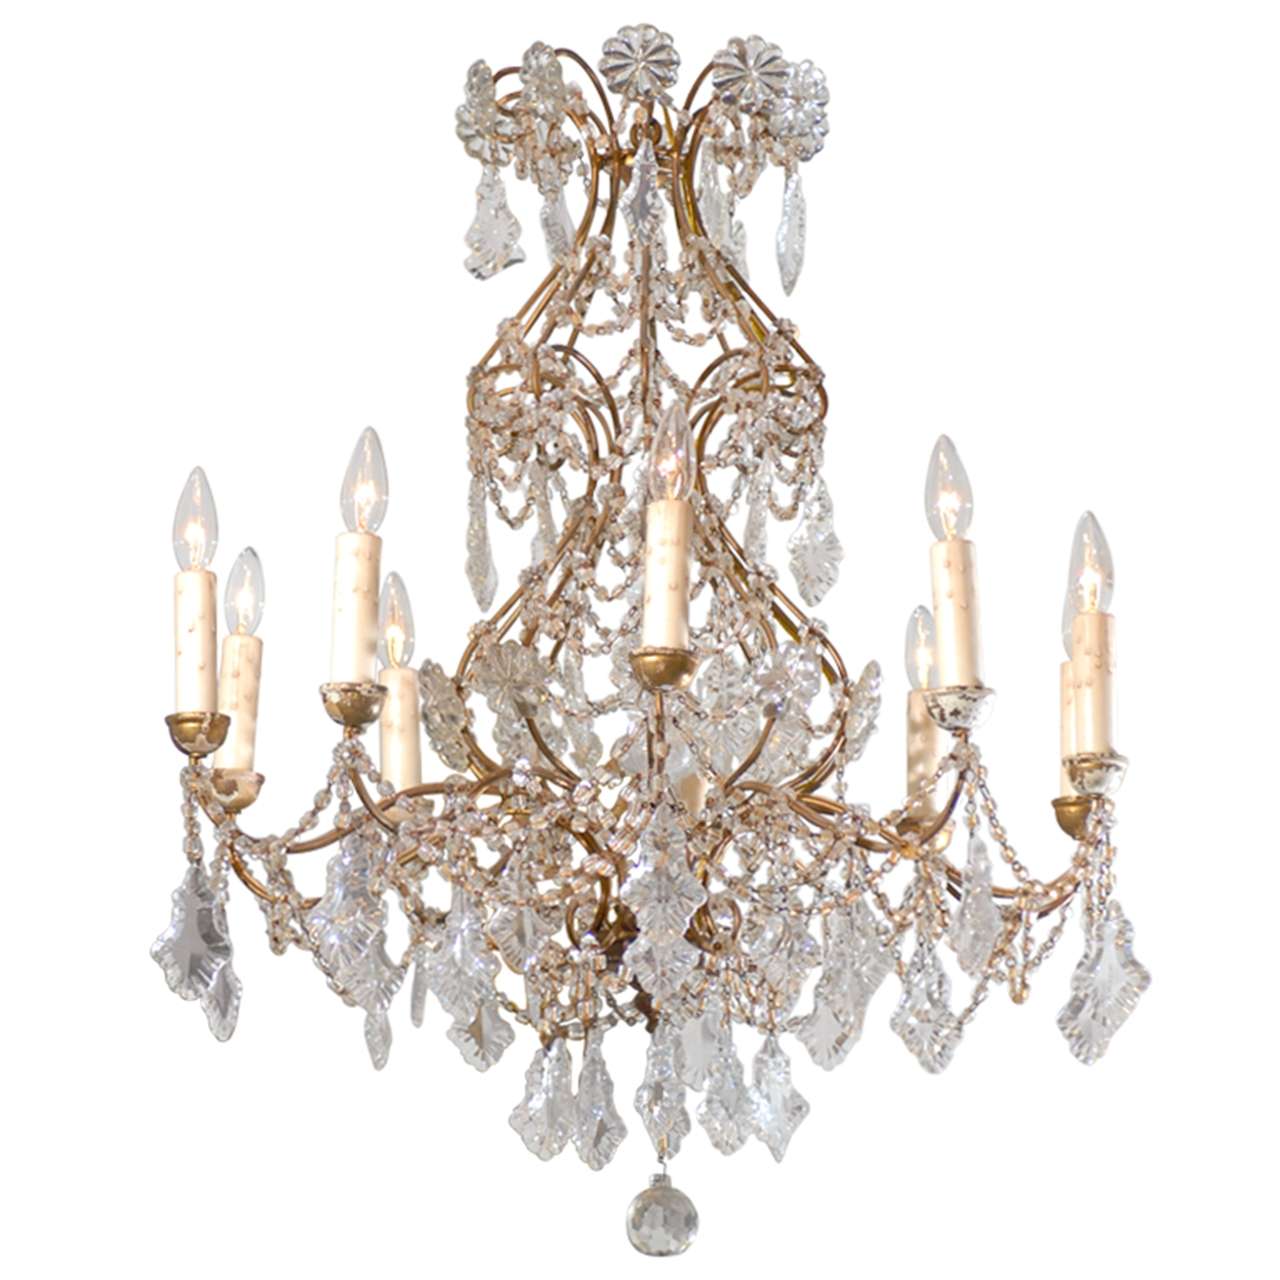 Italian 1850s Rococo Style Ten-Light Crystal Chandelier with Gilt Metal Armature